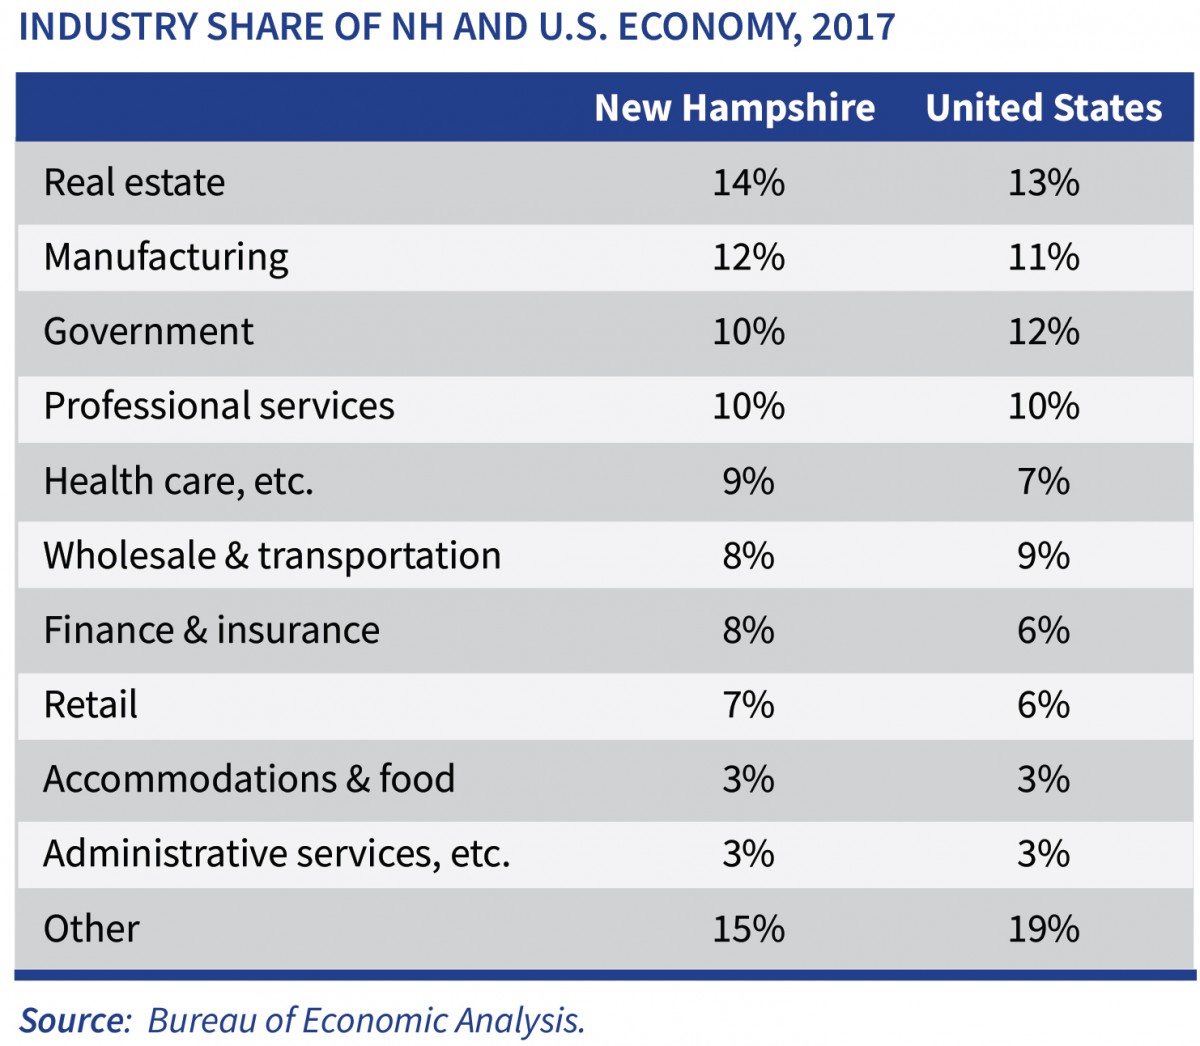 industry share of new hampshire and us economy, what is new hampshire